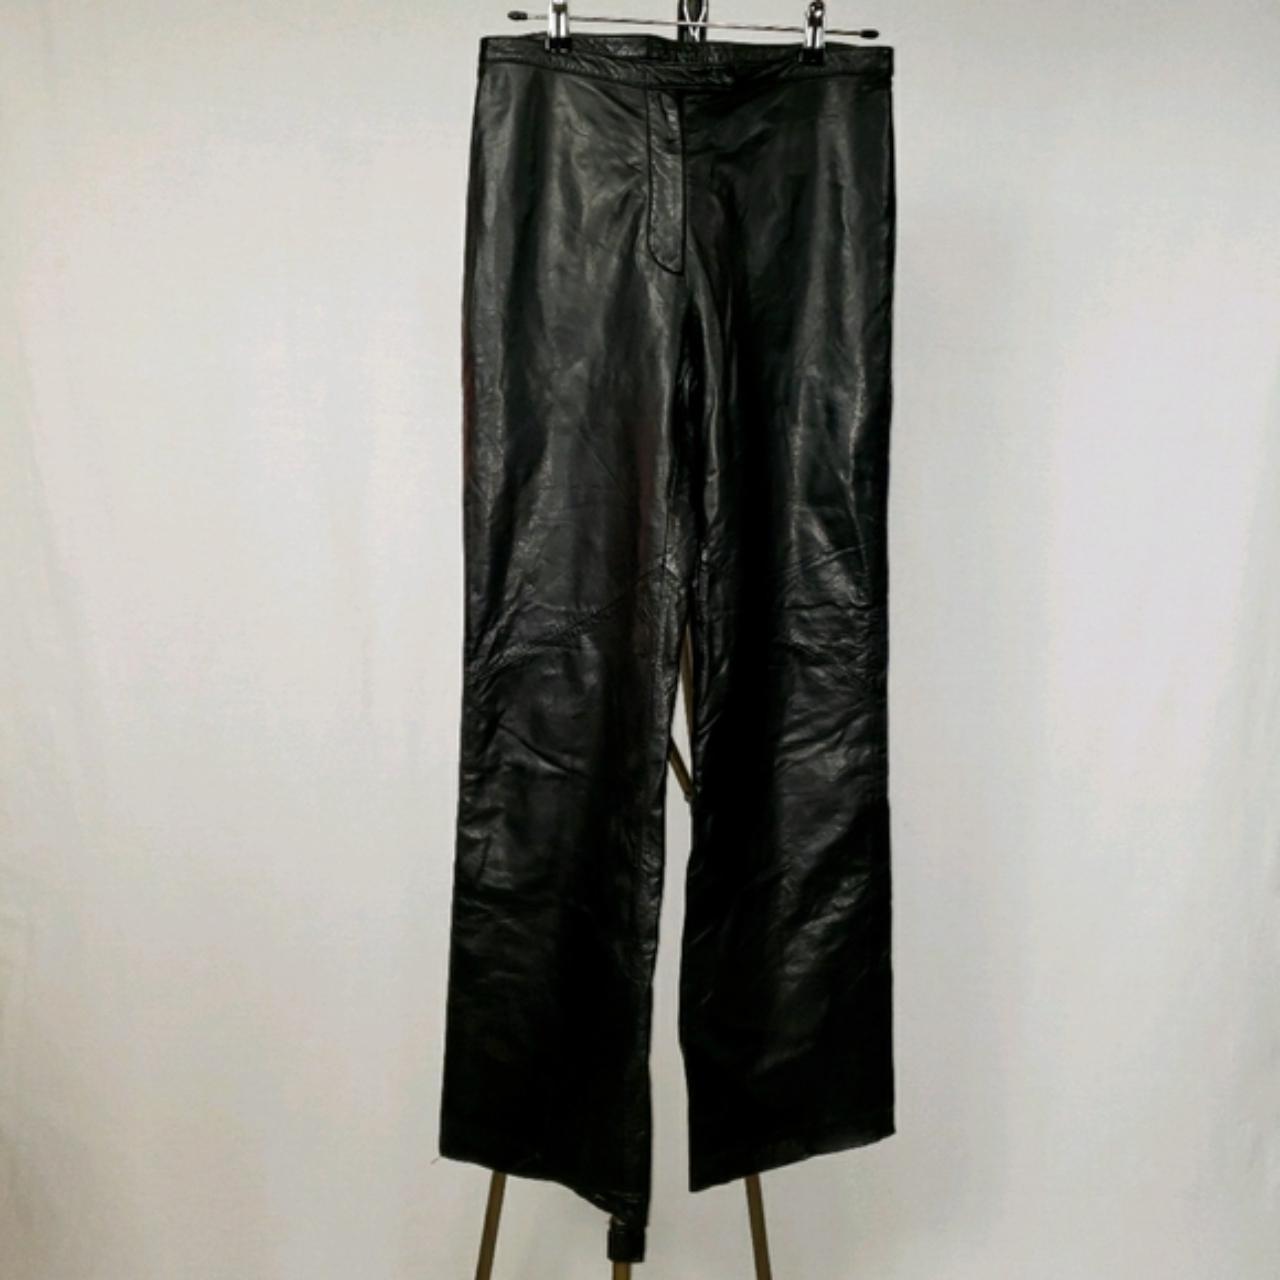 Comfy Ann Taylor leather pants with no pockets and a... - Depop